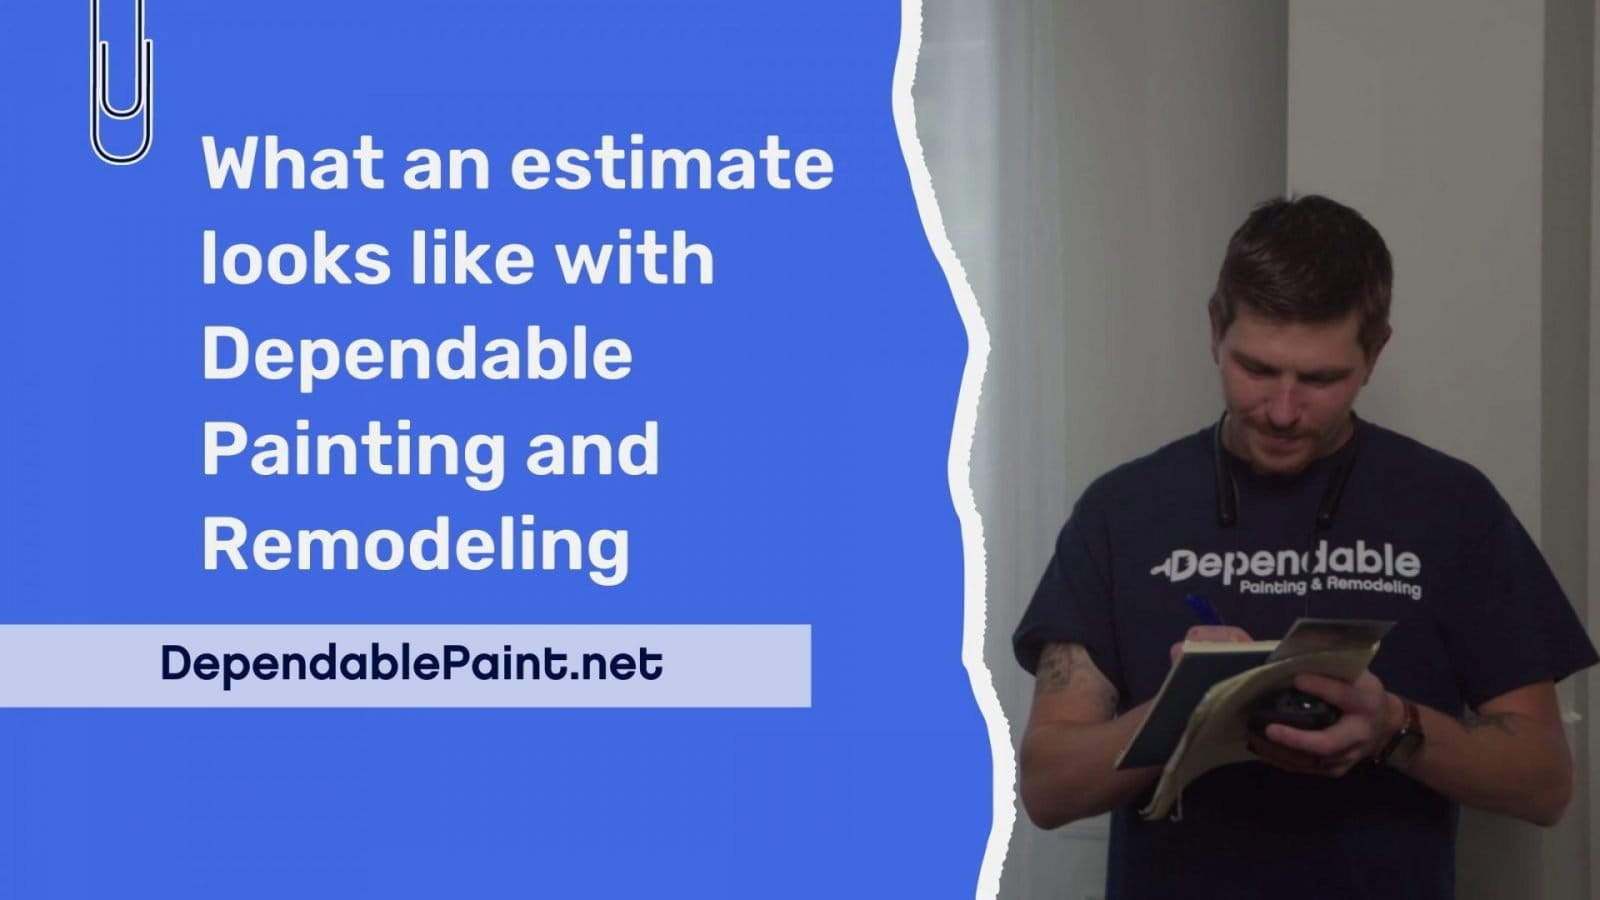 WHAT AN ESTIMATE LOOKS LIKE WITH DEPENDABLE PAINTING AND REMODELING